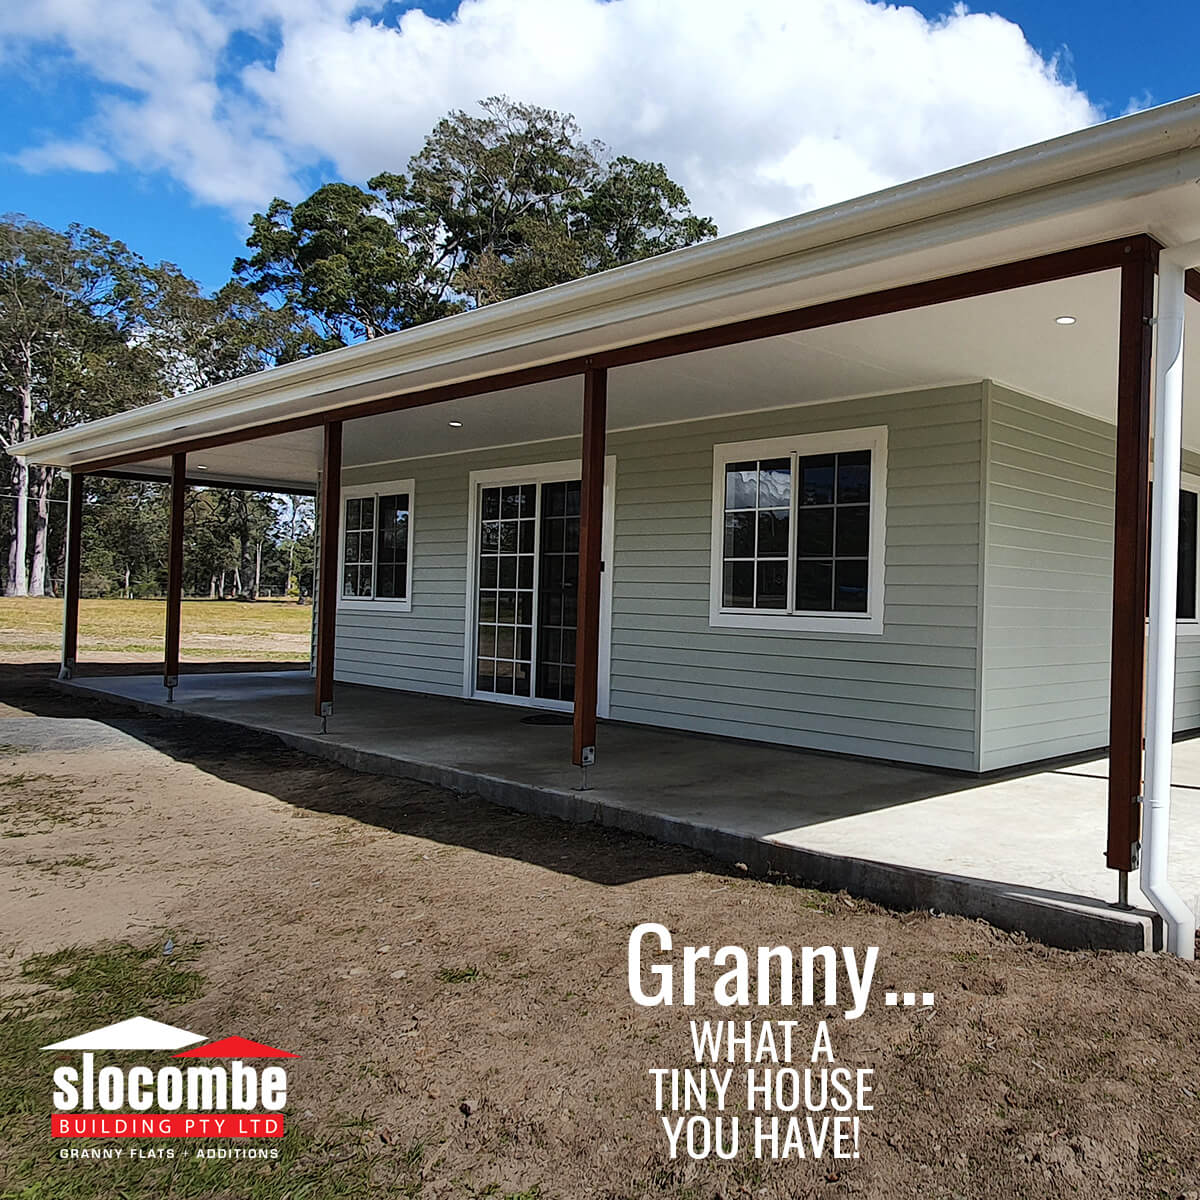 Granny...what a tiny house you have! Built by Slocombe Building Pty Ltd